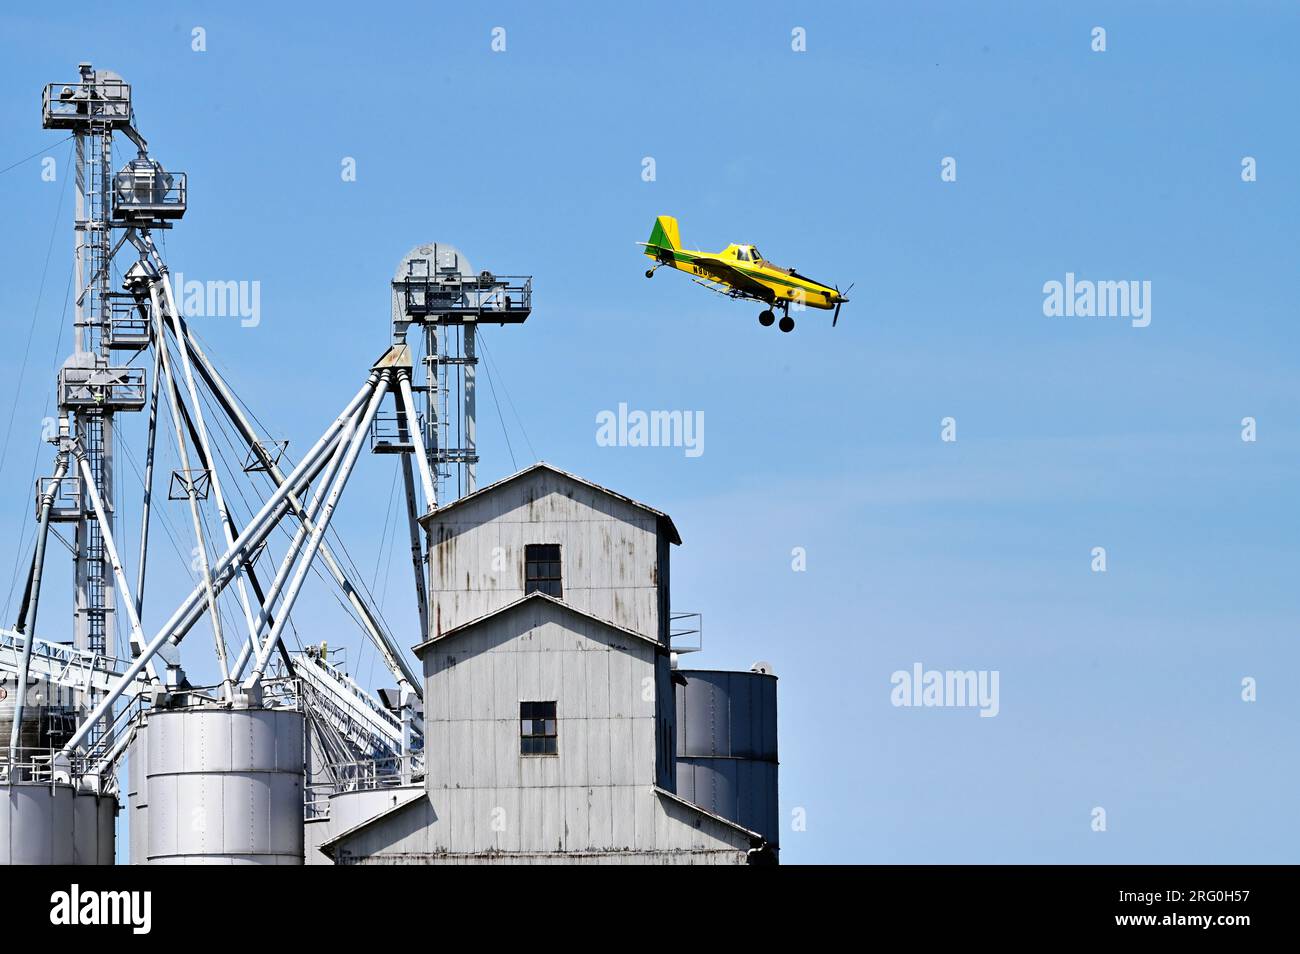 Earlville, Illinois, USA. A crop dusting airplane in a dive approaching a field of crops while passing very near a large grain elevator. Stock Photo